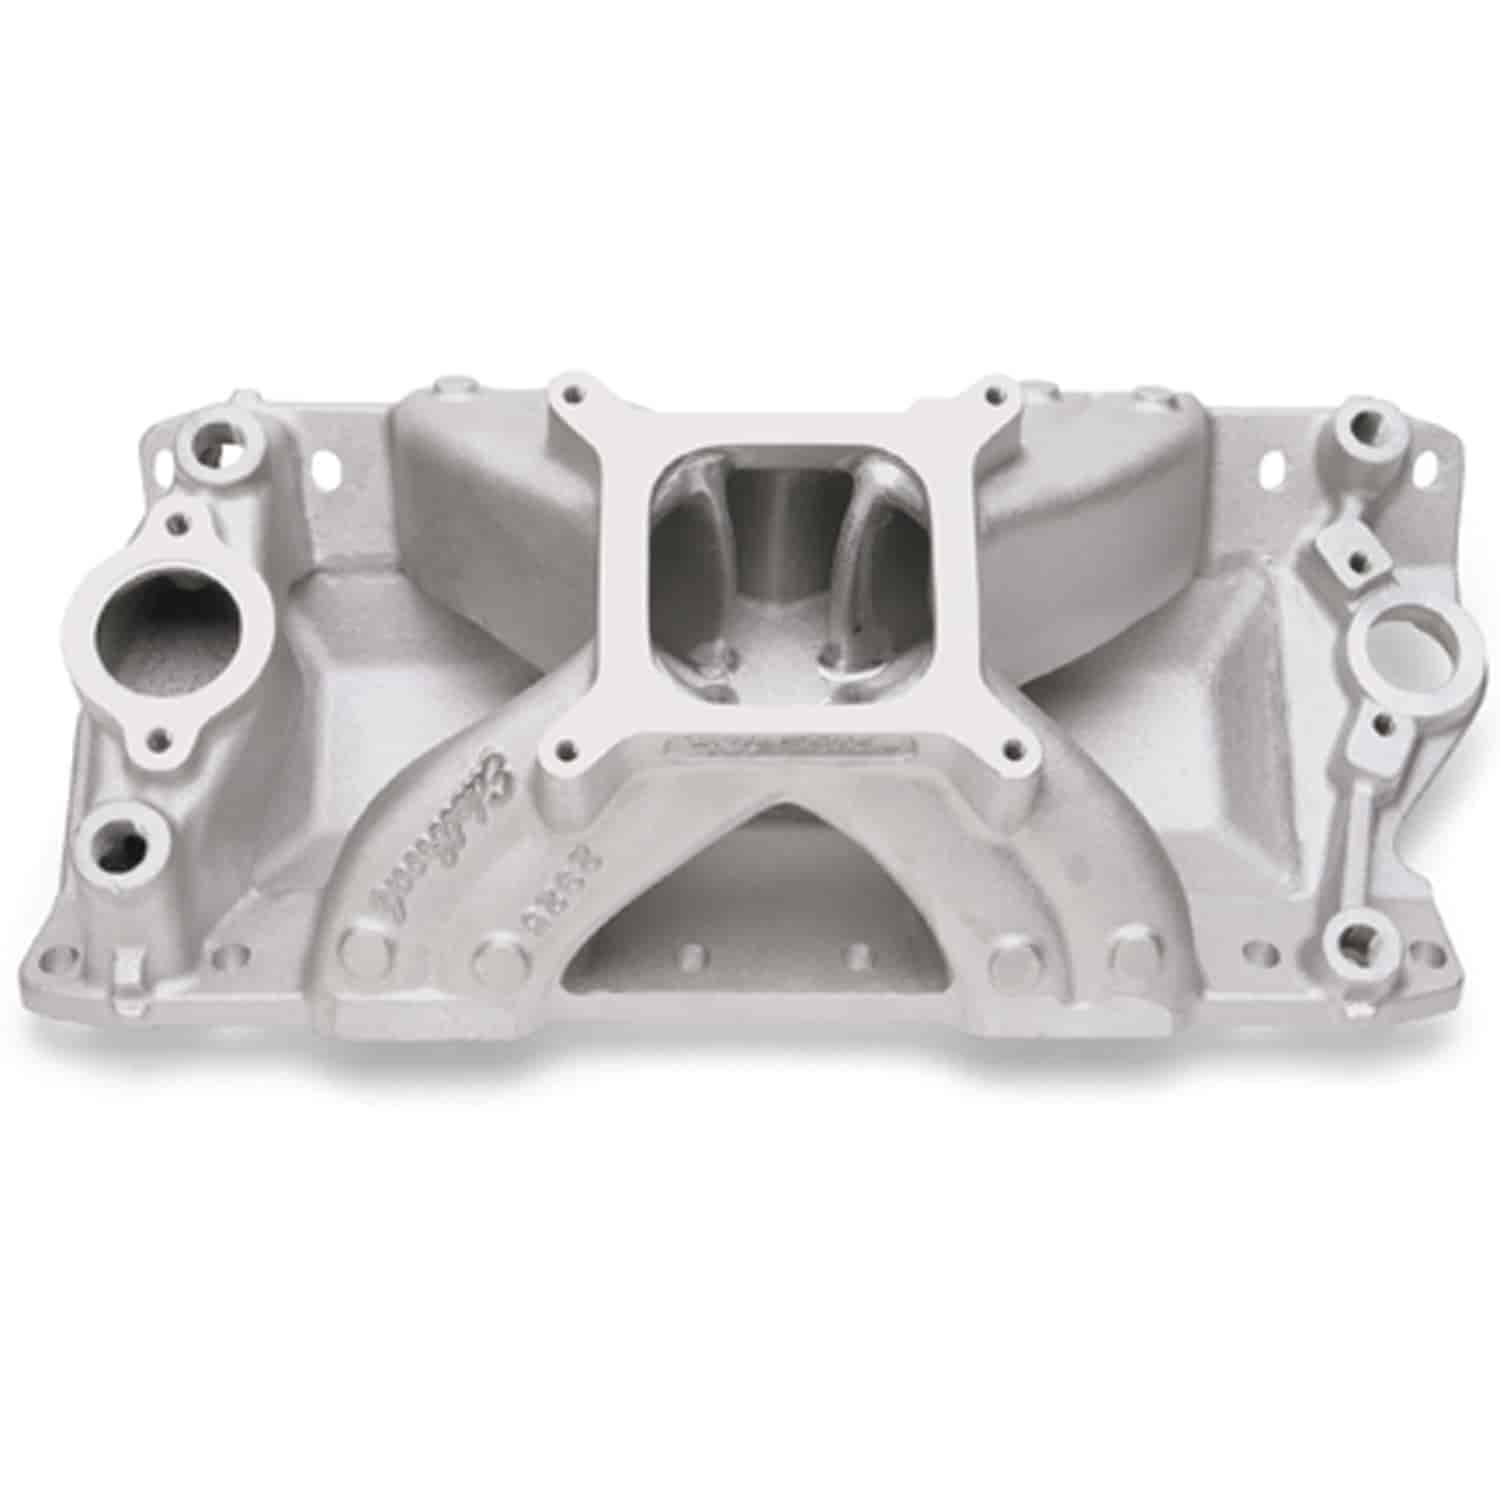 Super Victor CNC Intake Manifold for Small Block Chevy